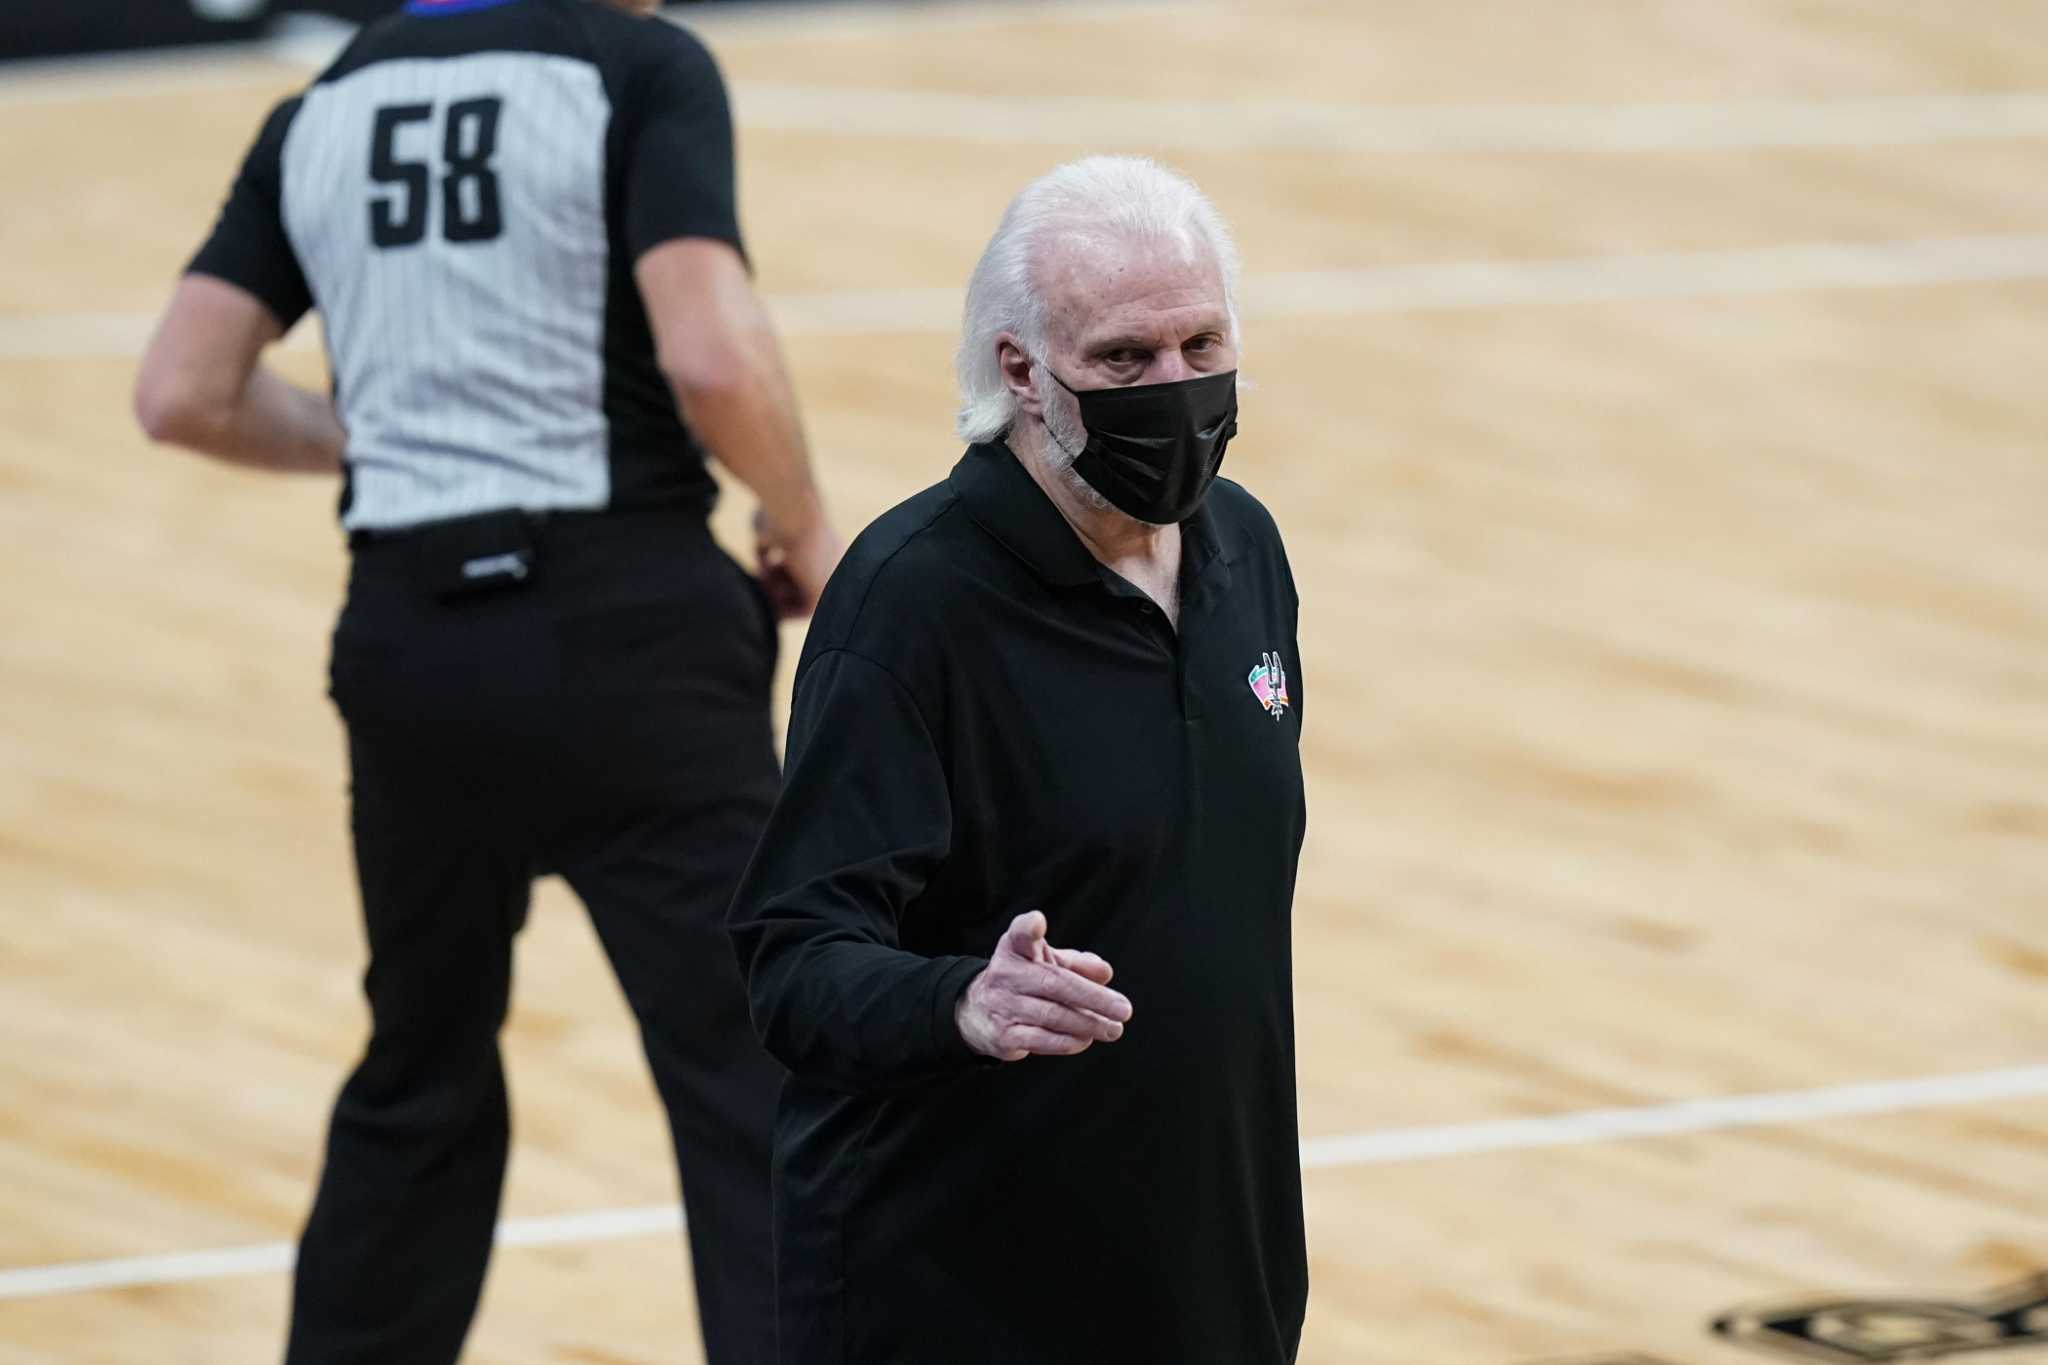 Gregg Popovich's 'Next guy that misses a free throw is going to